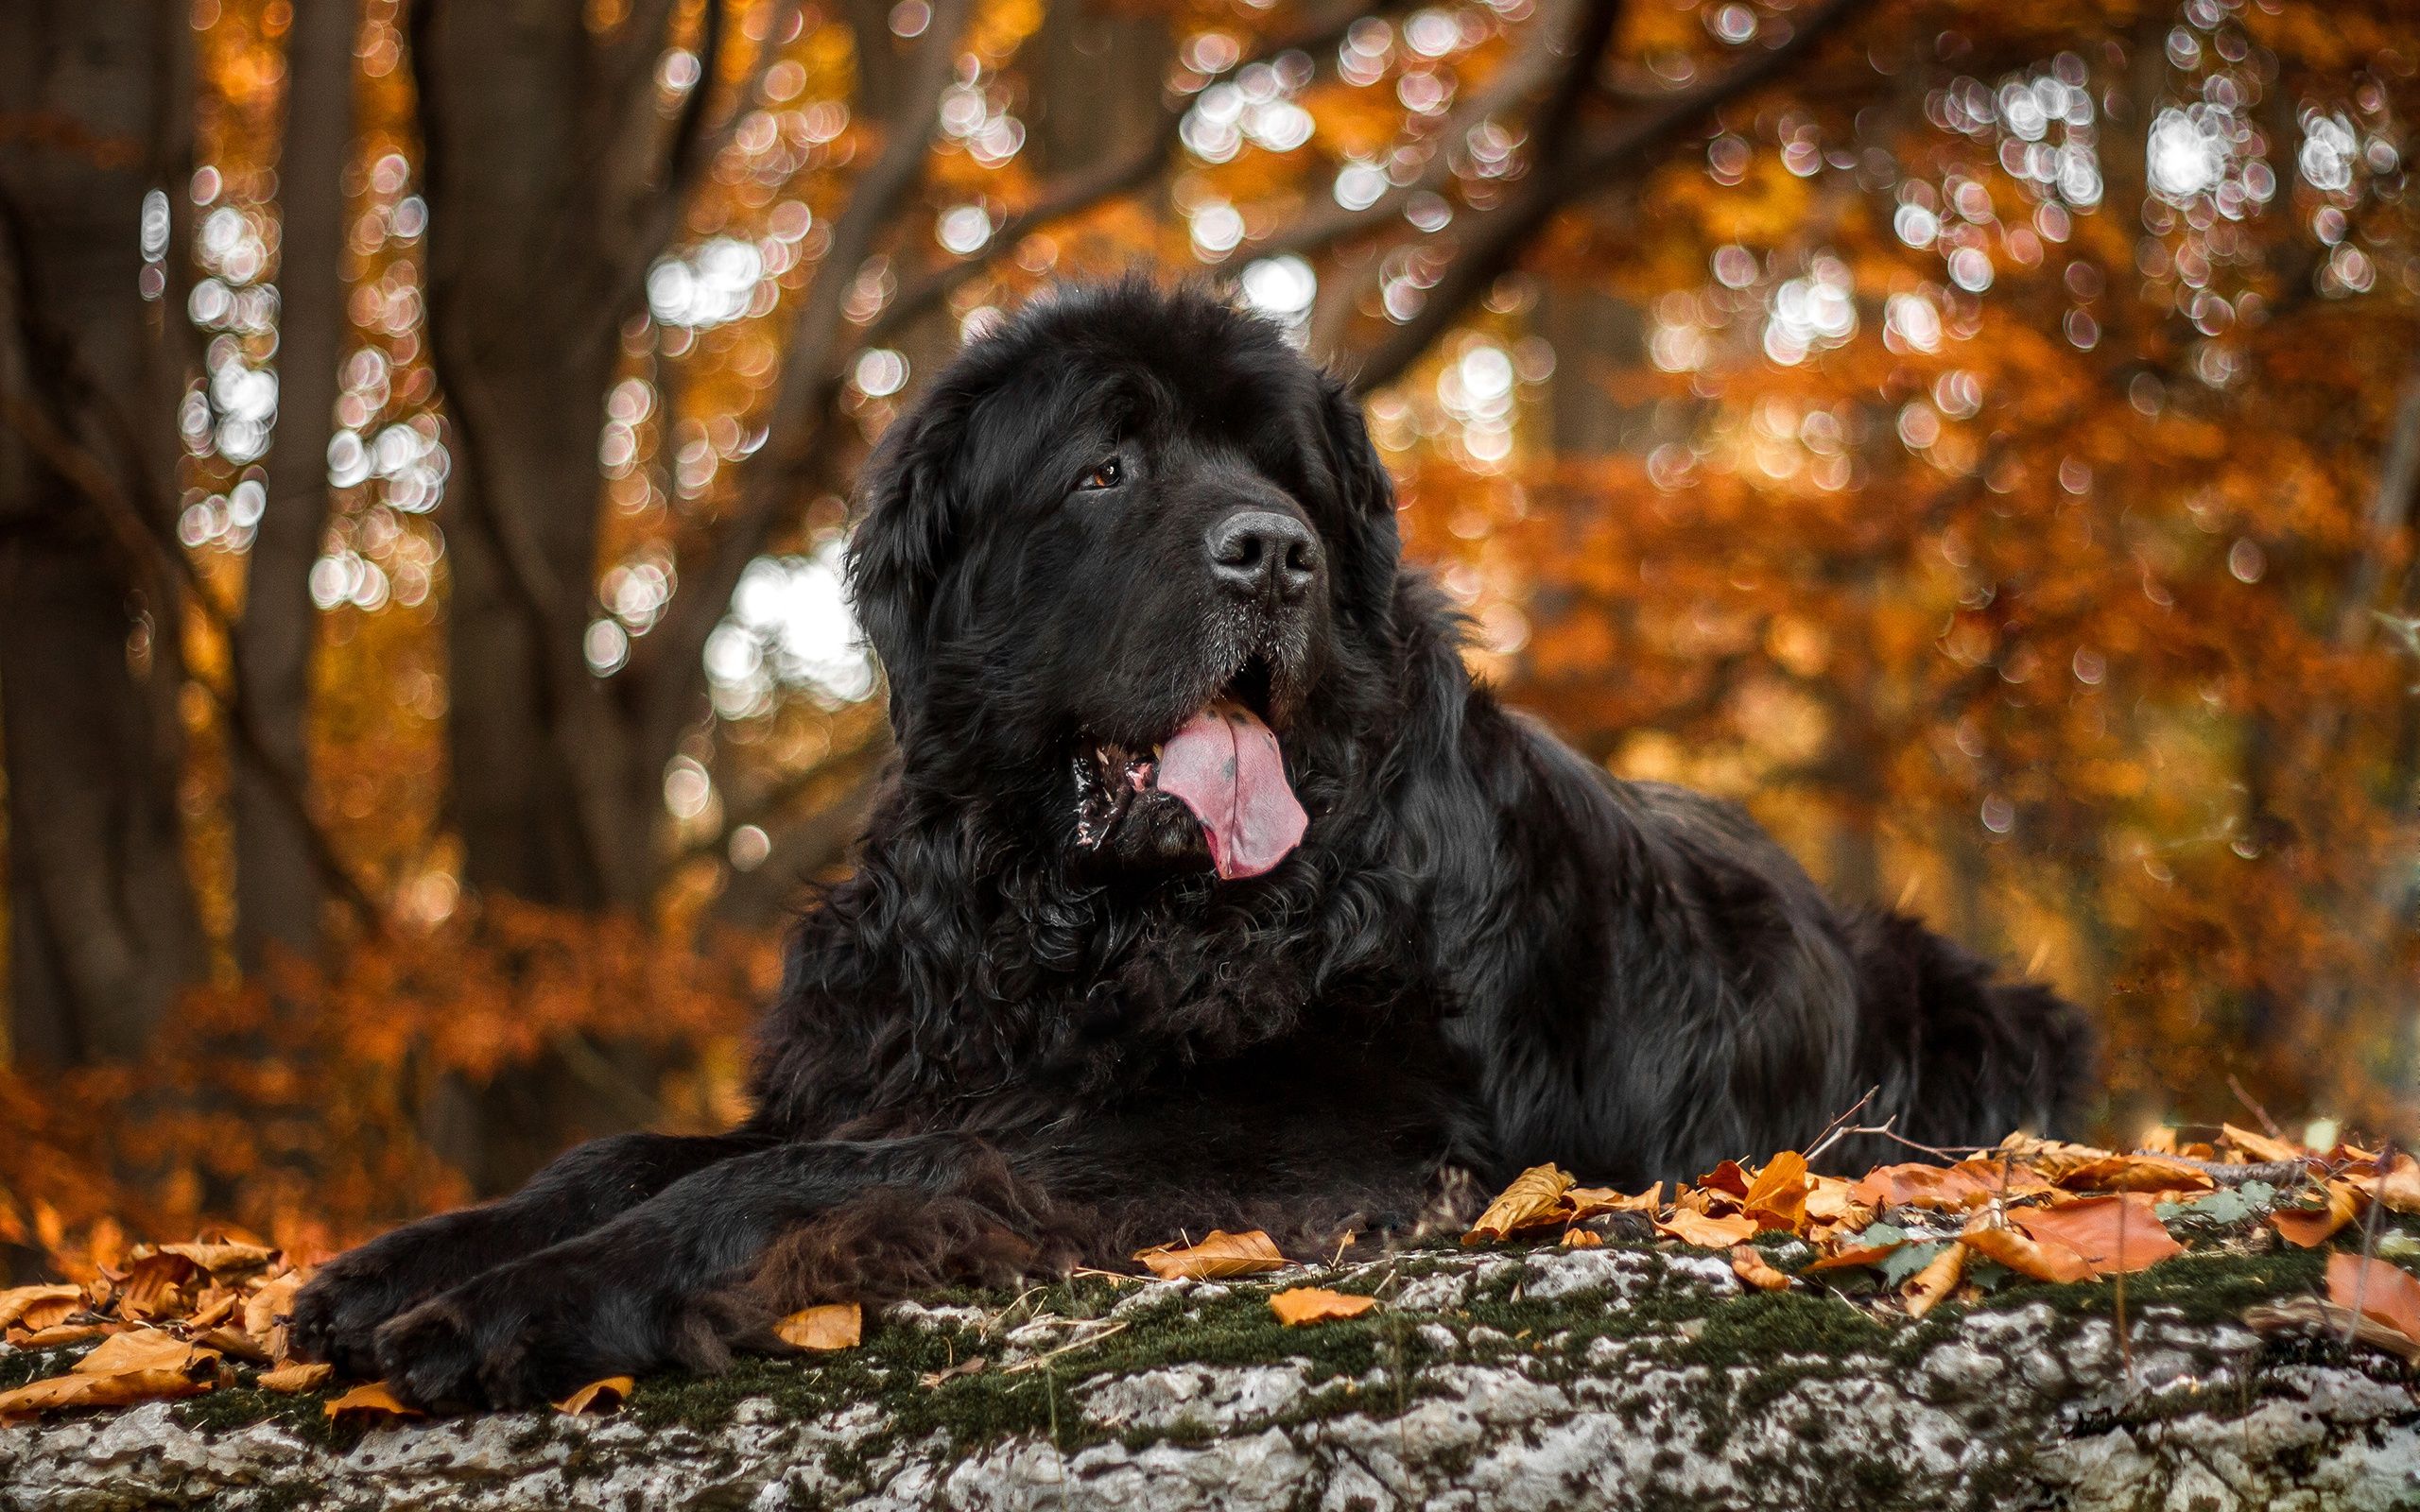 Download wallpaper Newfoundland dog, pets, large black dog, English breeds of dogs, large dogs for desktop with resolution 2560x1600. High Quality HD picture wallpaper